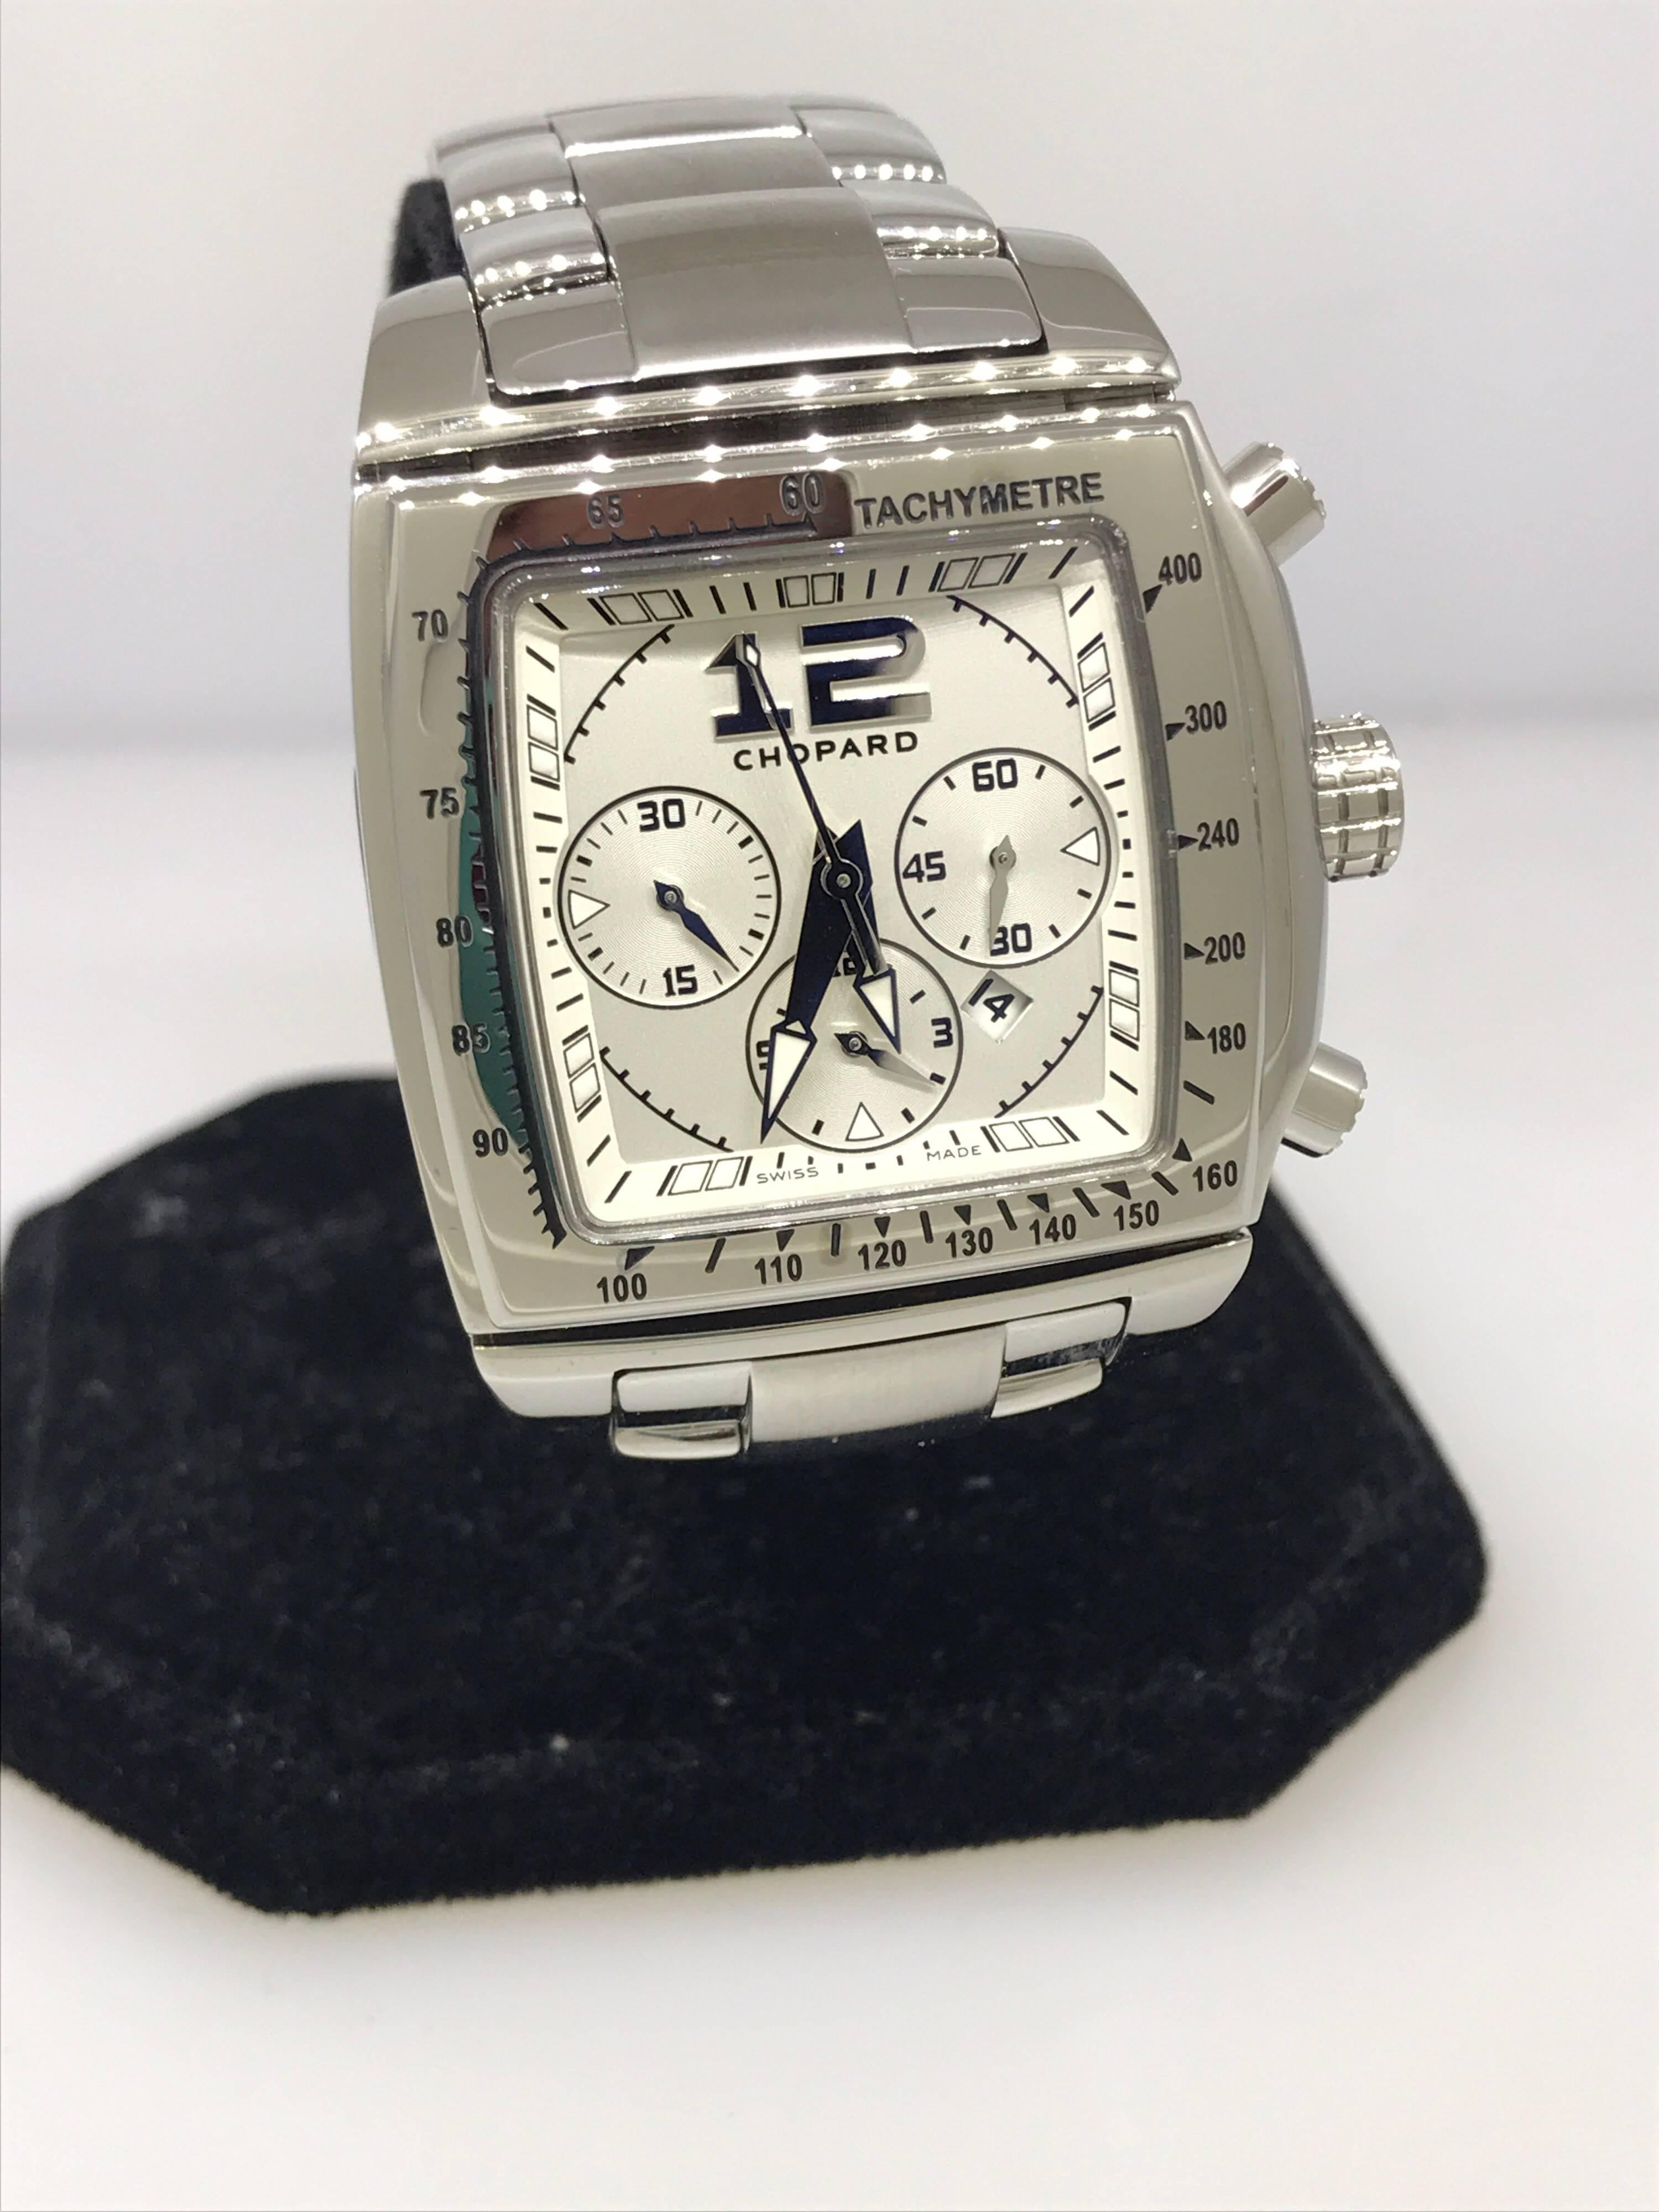 Chopard Two o Ten Automatic Chronograph Watch

Model Number: 15/8462-3003

100% Authentic

Brand New

Comes with original Chopard box, certificate of authenticity and warranty and instruction manual

Stainless Steel Dial

White Dial &